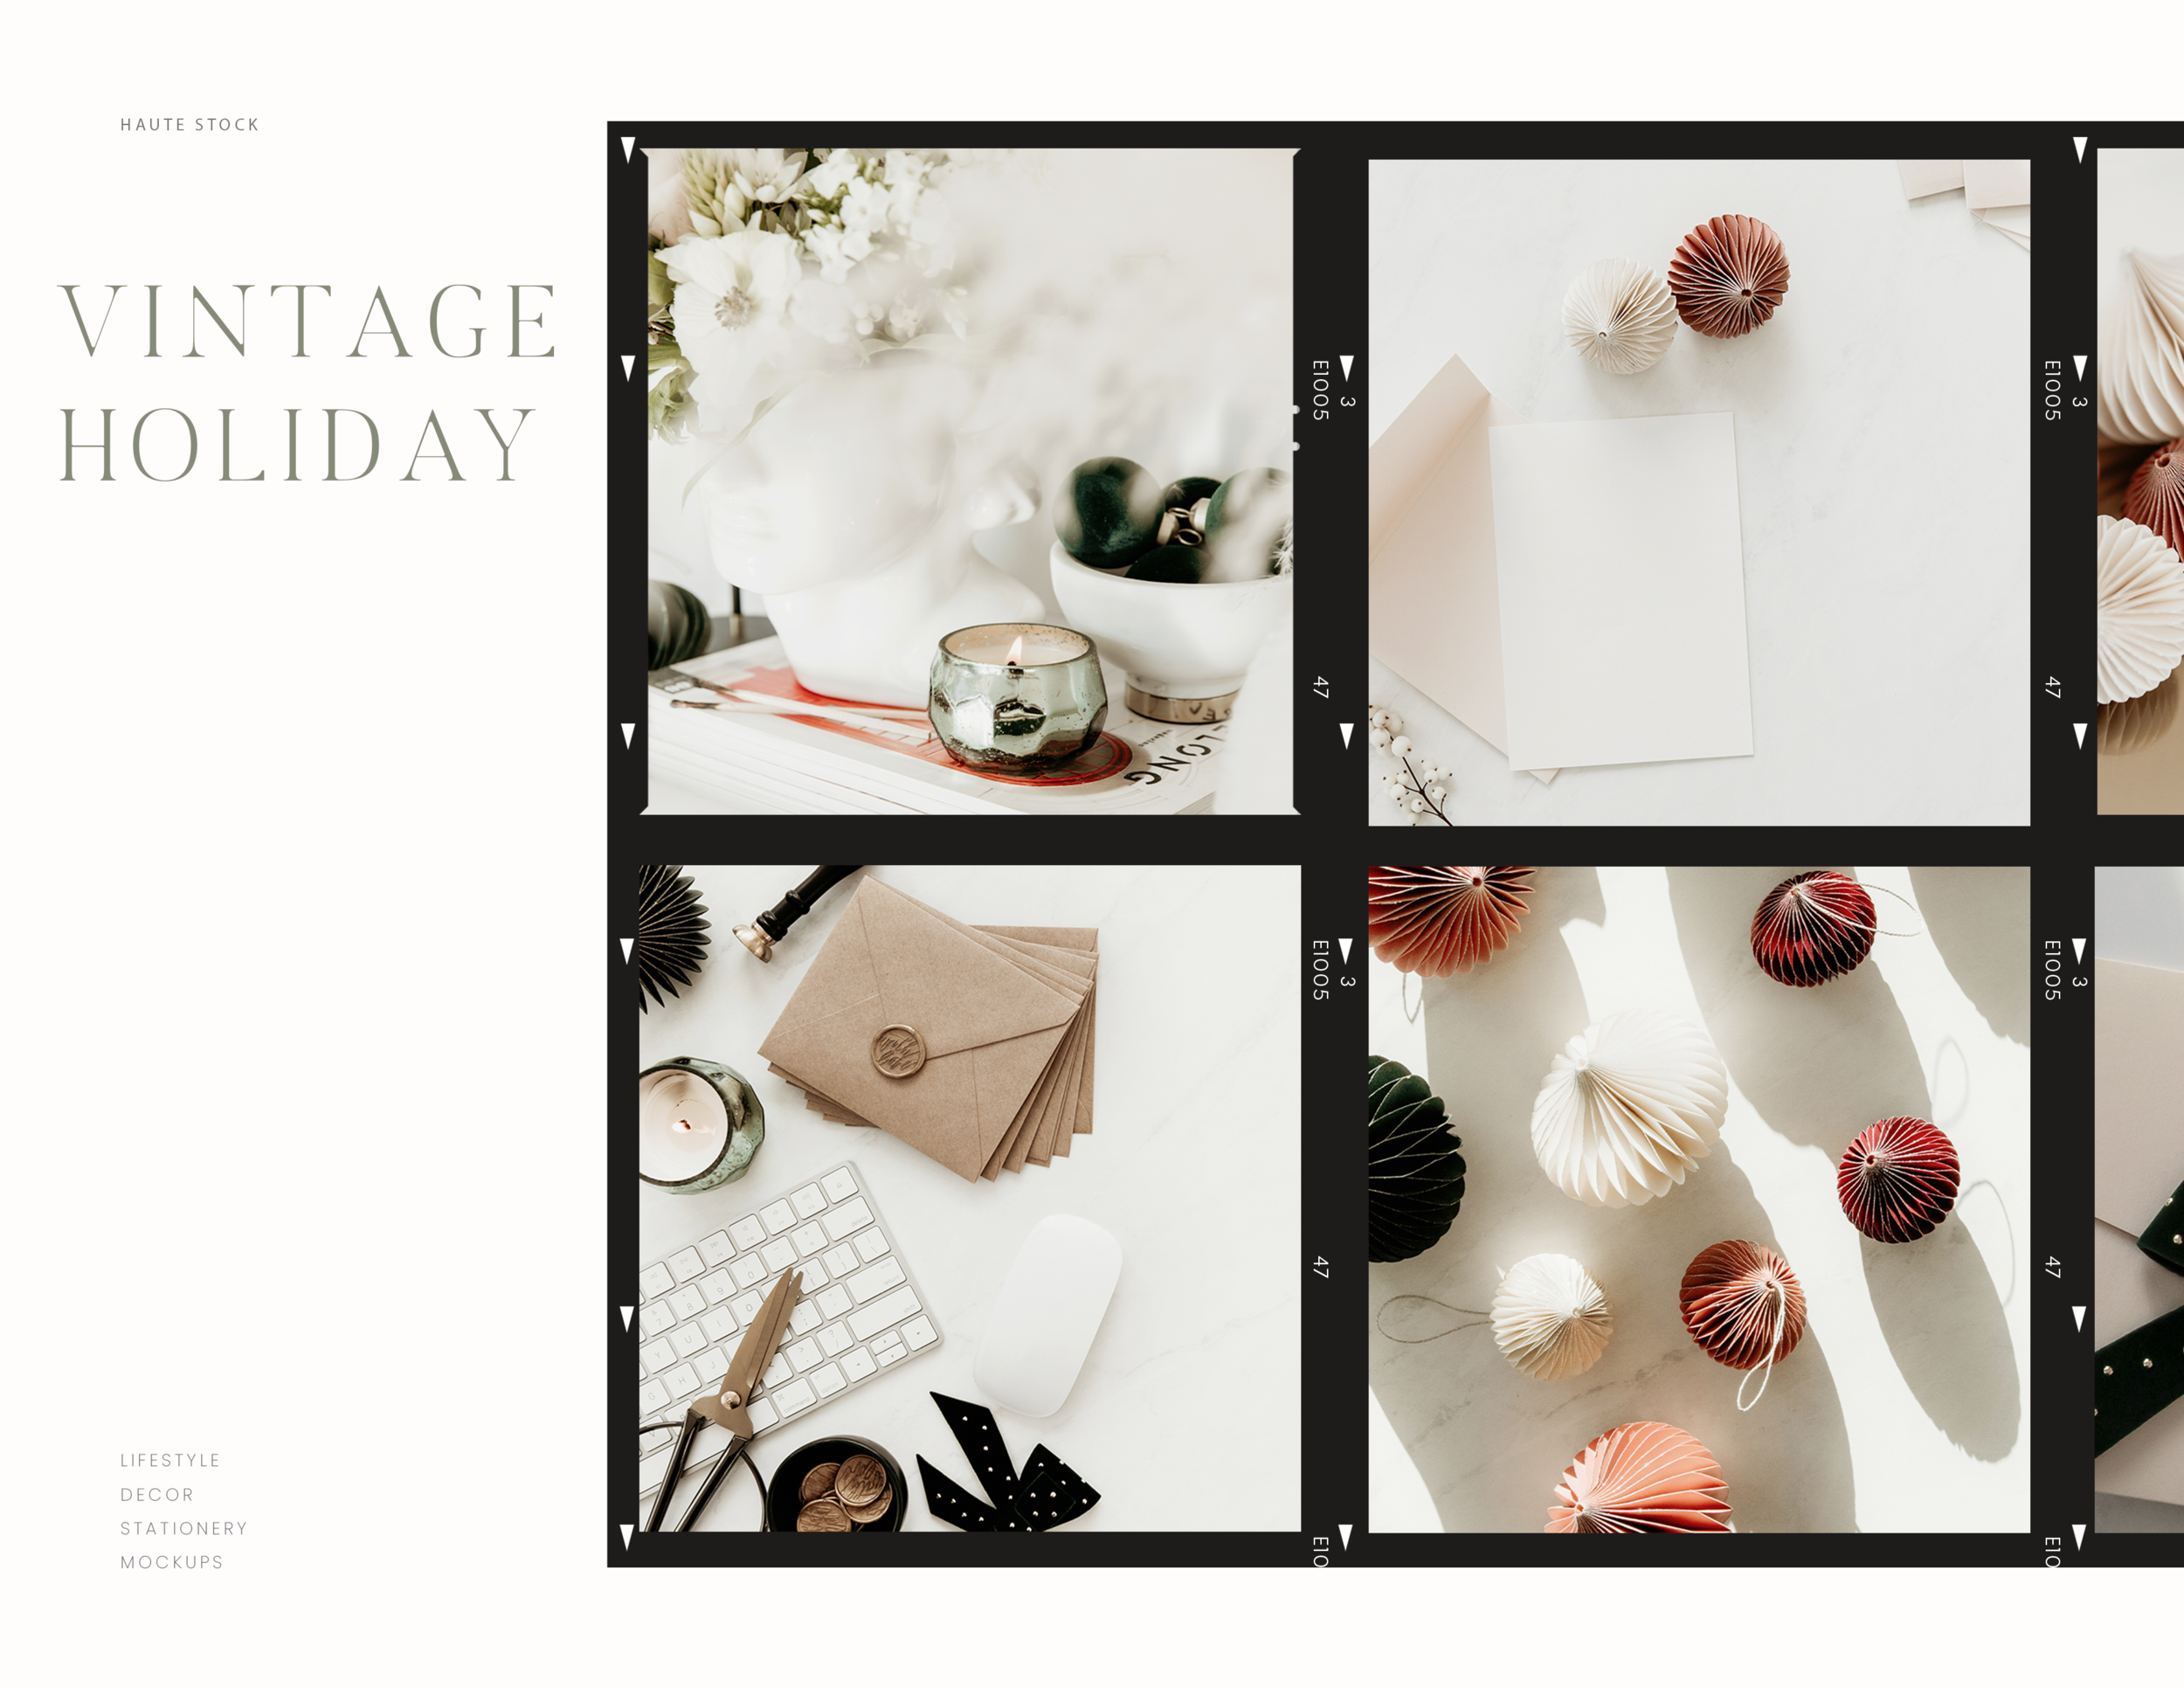 Vintage inspired holiday stock photos from Haute Stock.